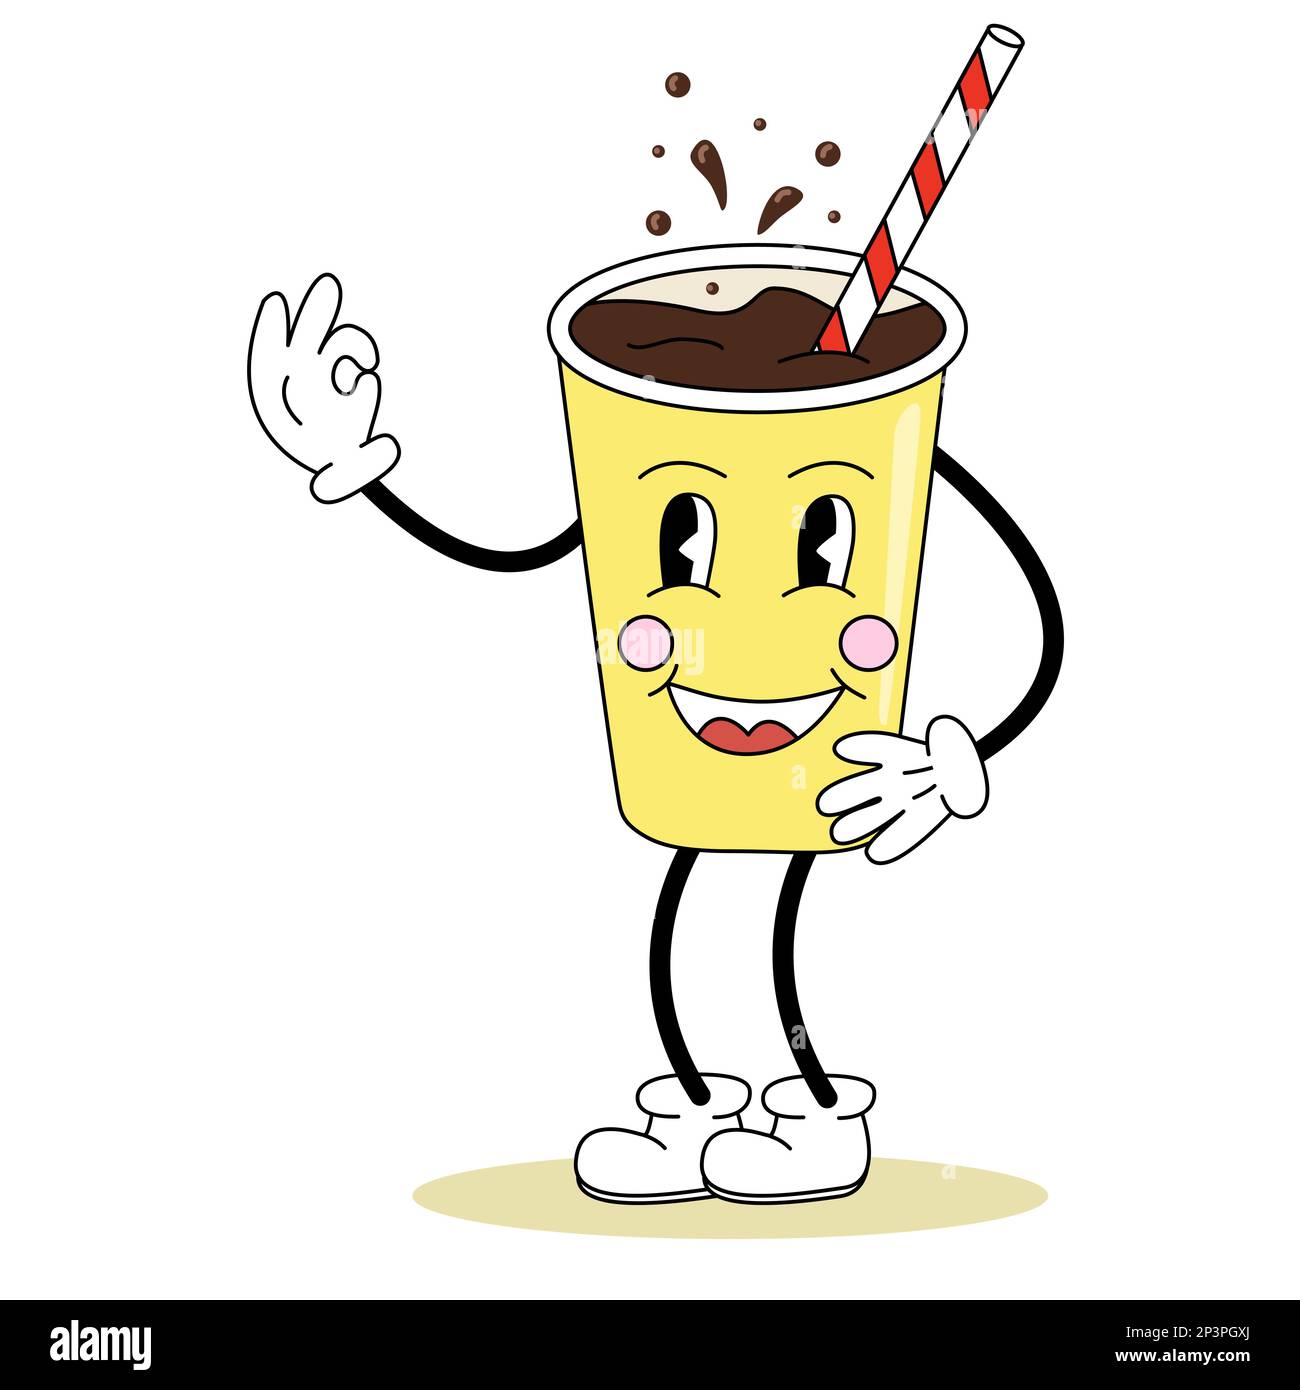 Retro style cute soft soda drink cartoon character with a straw